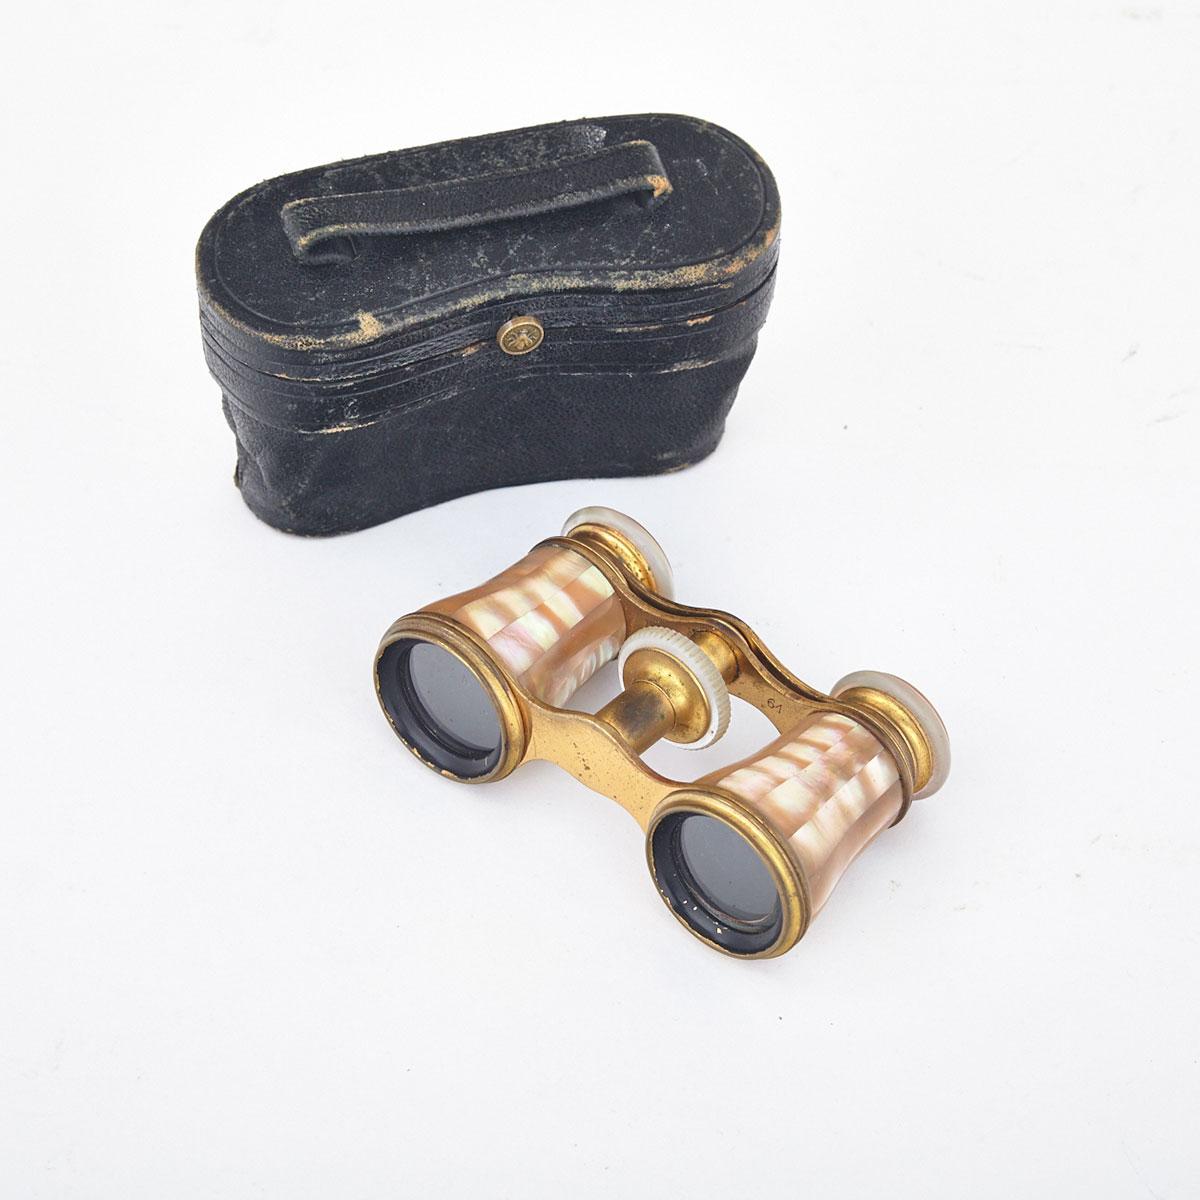 CASED PAIR OF FRENCH MOTHER-OF-PEARL MOUNTED GILT METAL OPERA GLASSES, LEMAIRE, PARIS, 19TH CENTURY